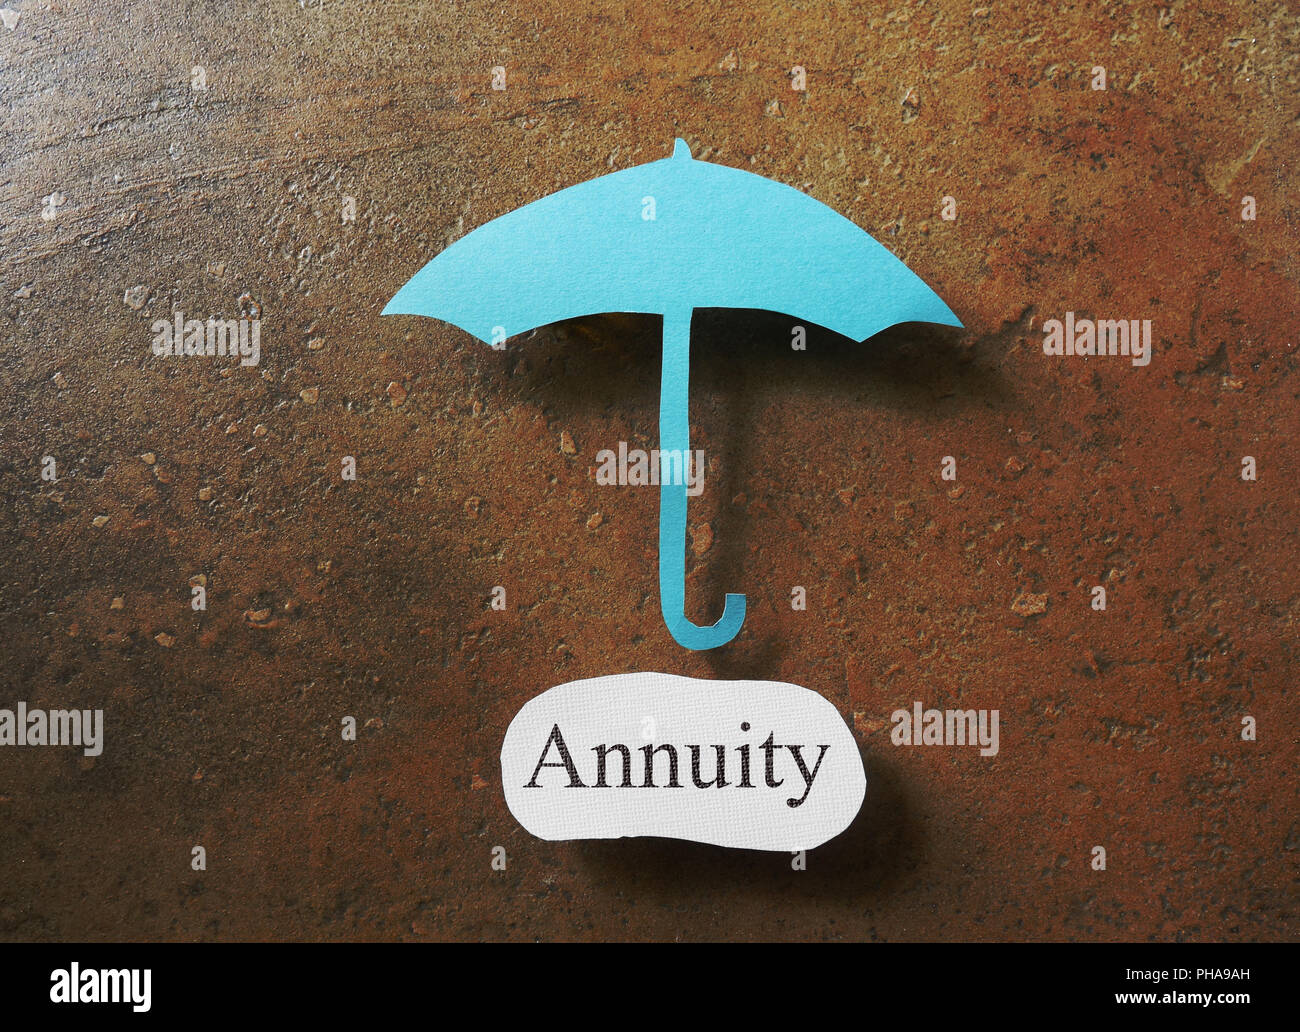 Annuity Investment Stock Photo